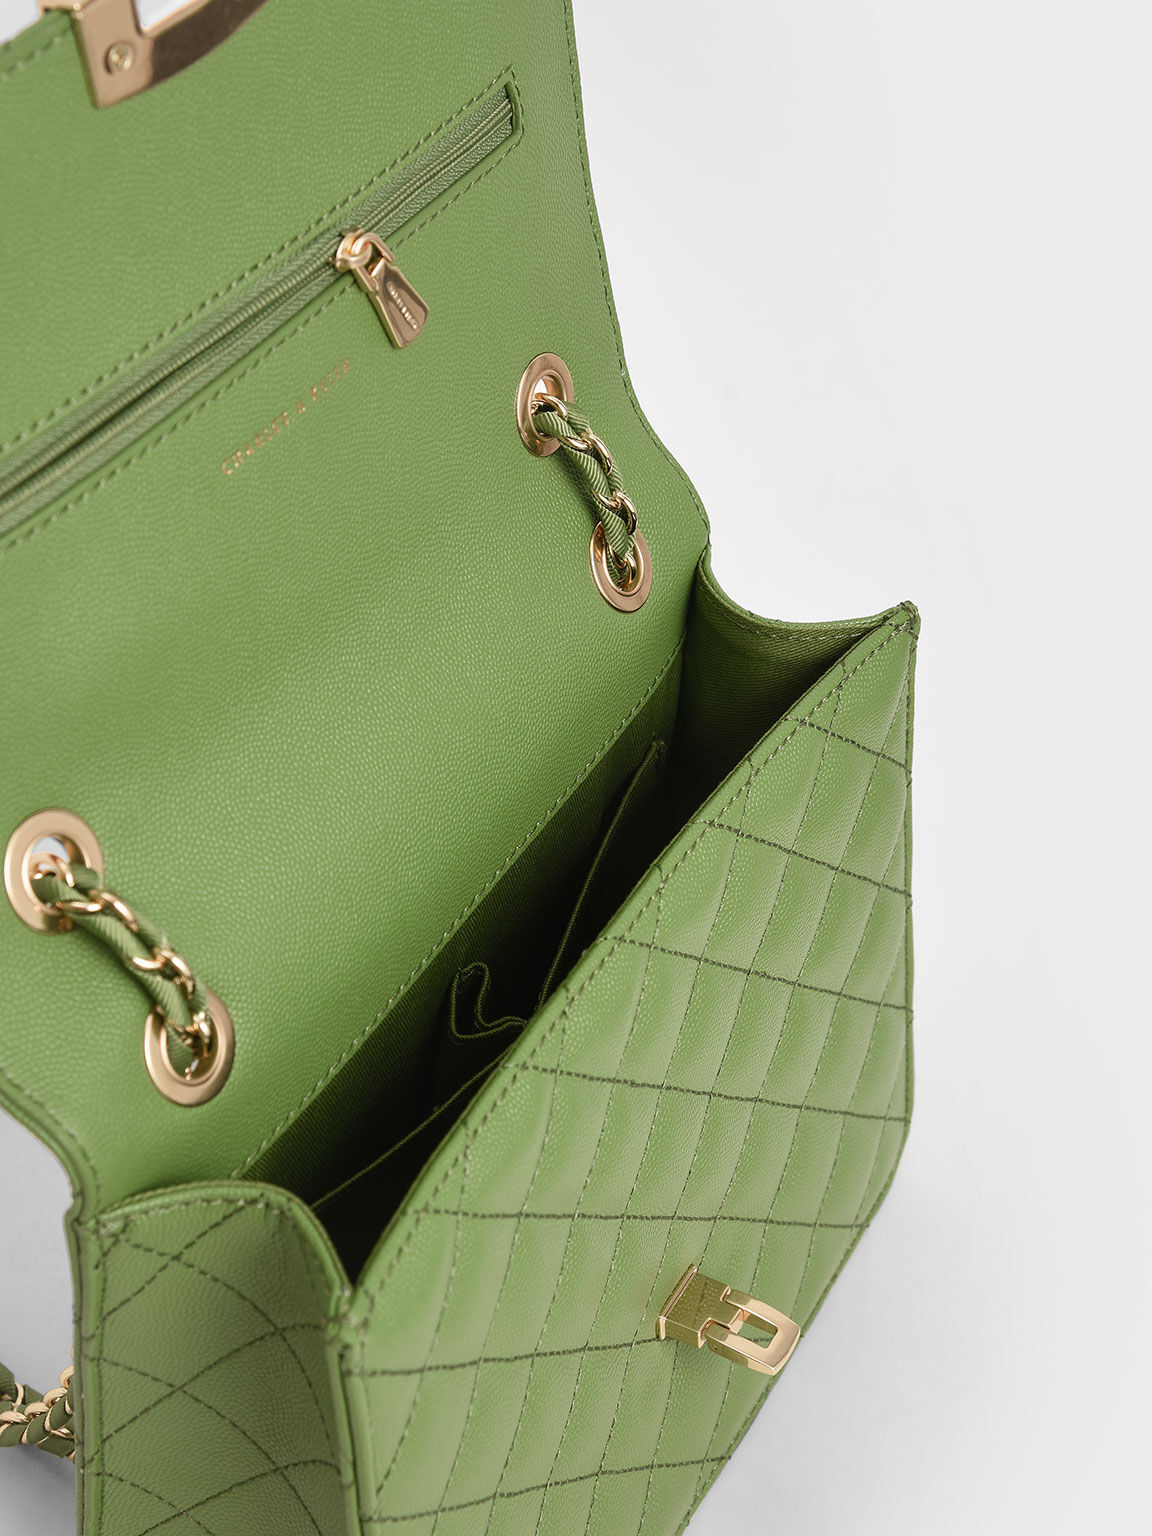 Quilted Chain Strap Clutch, Green, hi-res